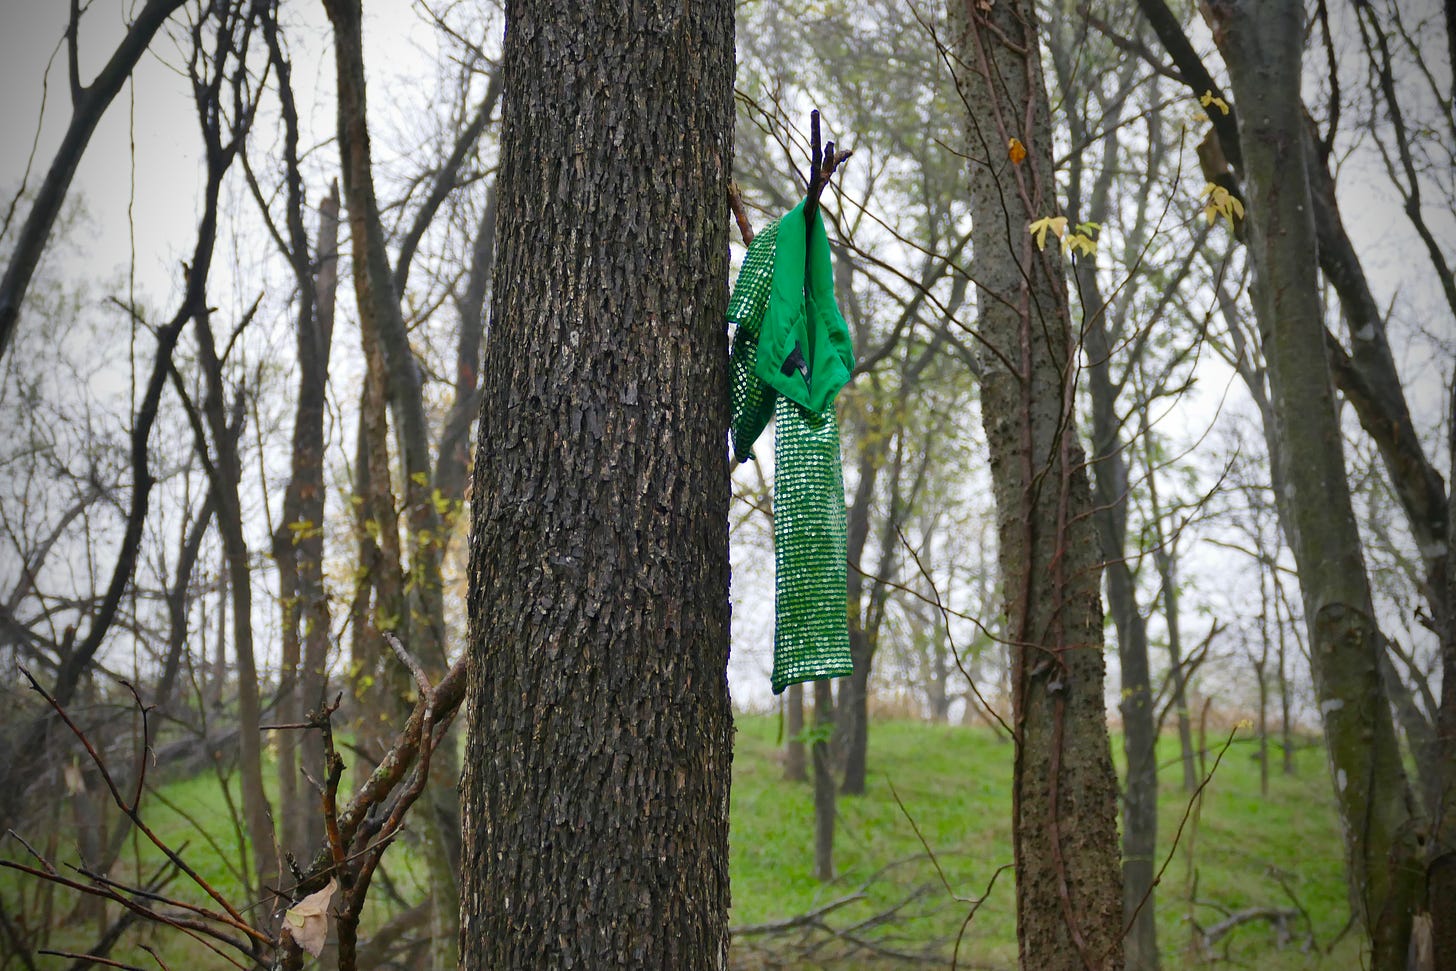 Sequined green fabric hanging from a tree